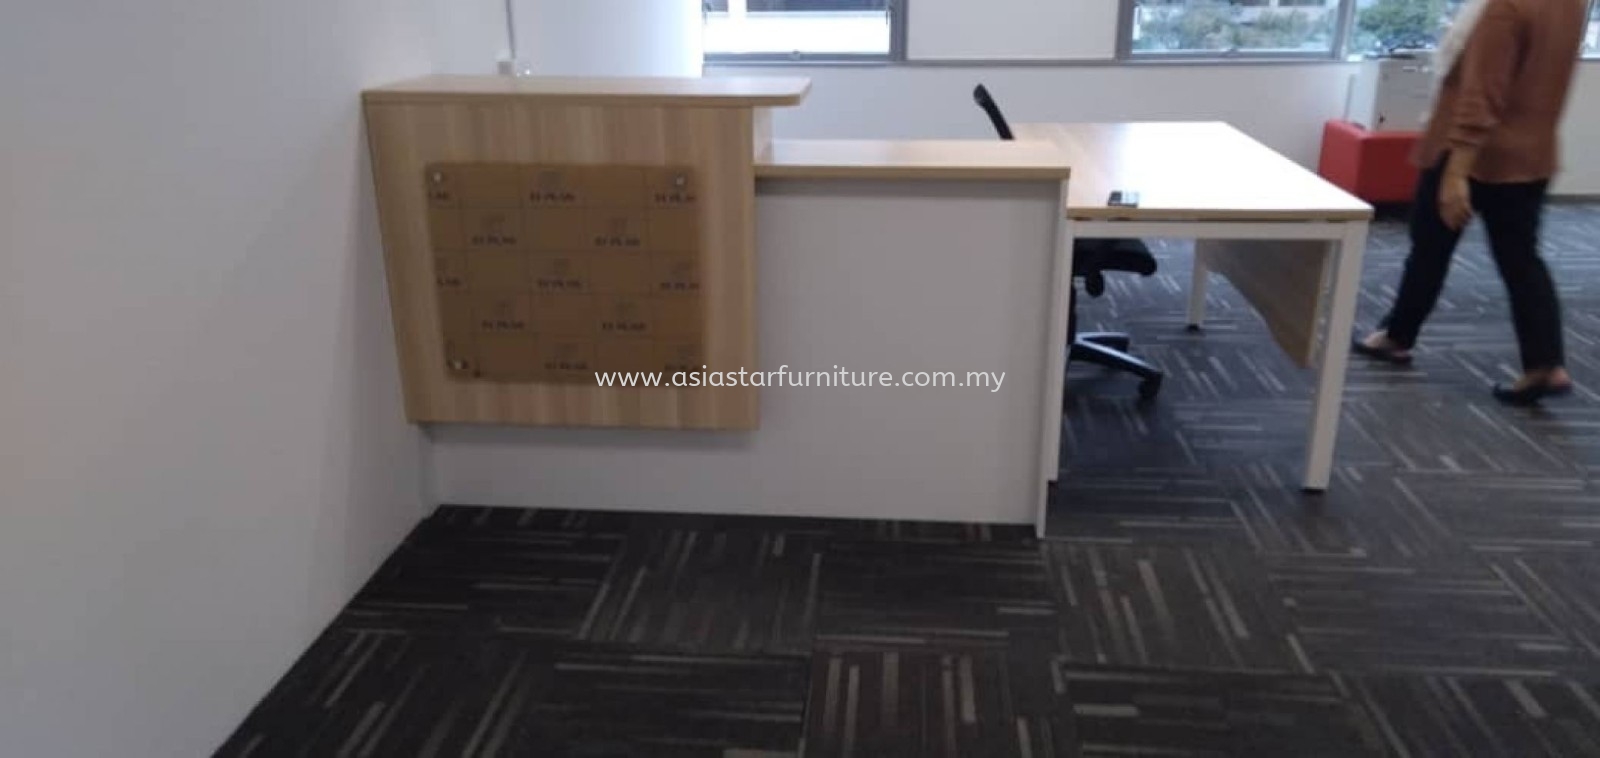 DELIVERY & INSTALLATION OFFICE RECEPTION COUNTER TABLE B-SET 1800 OFFICE FURNITURE ZON PERINDSTRIAN PJCT, PETALING JAYA